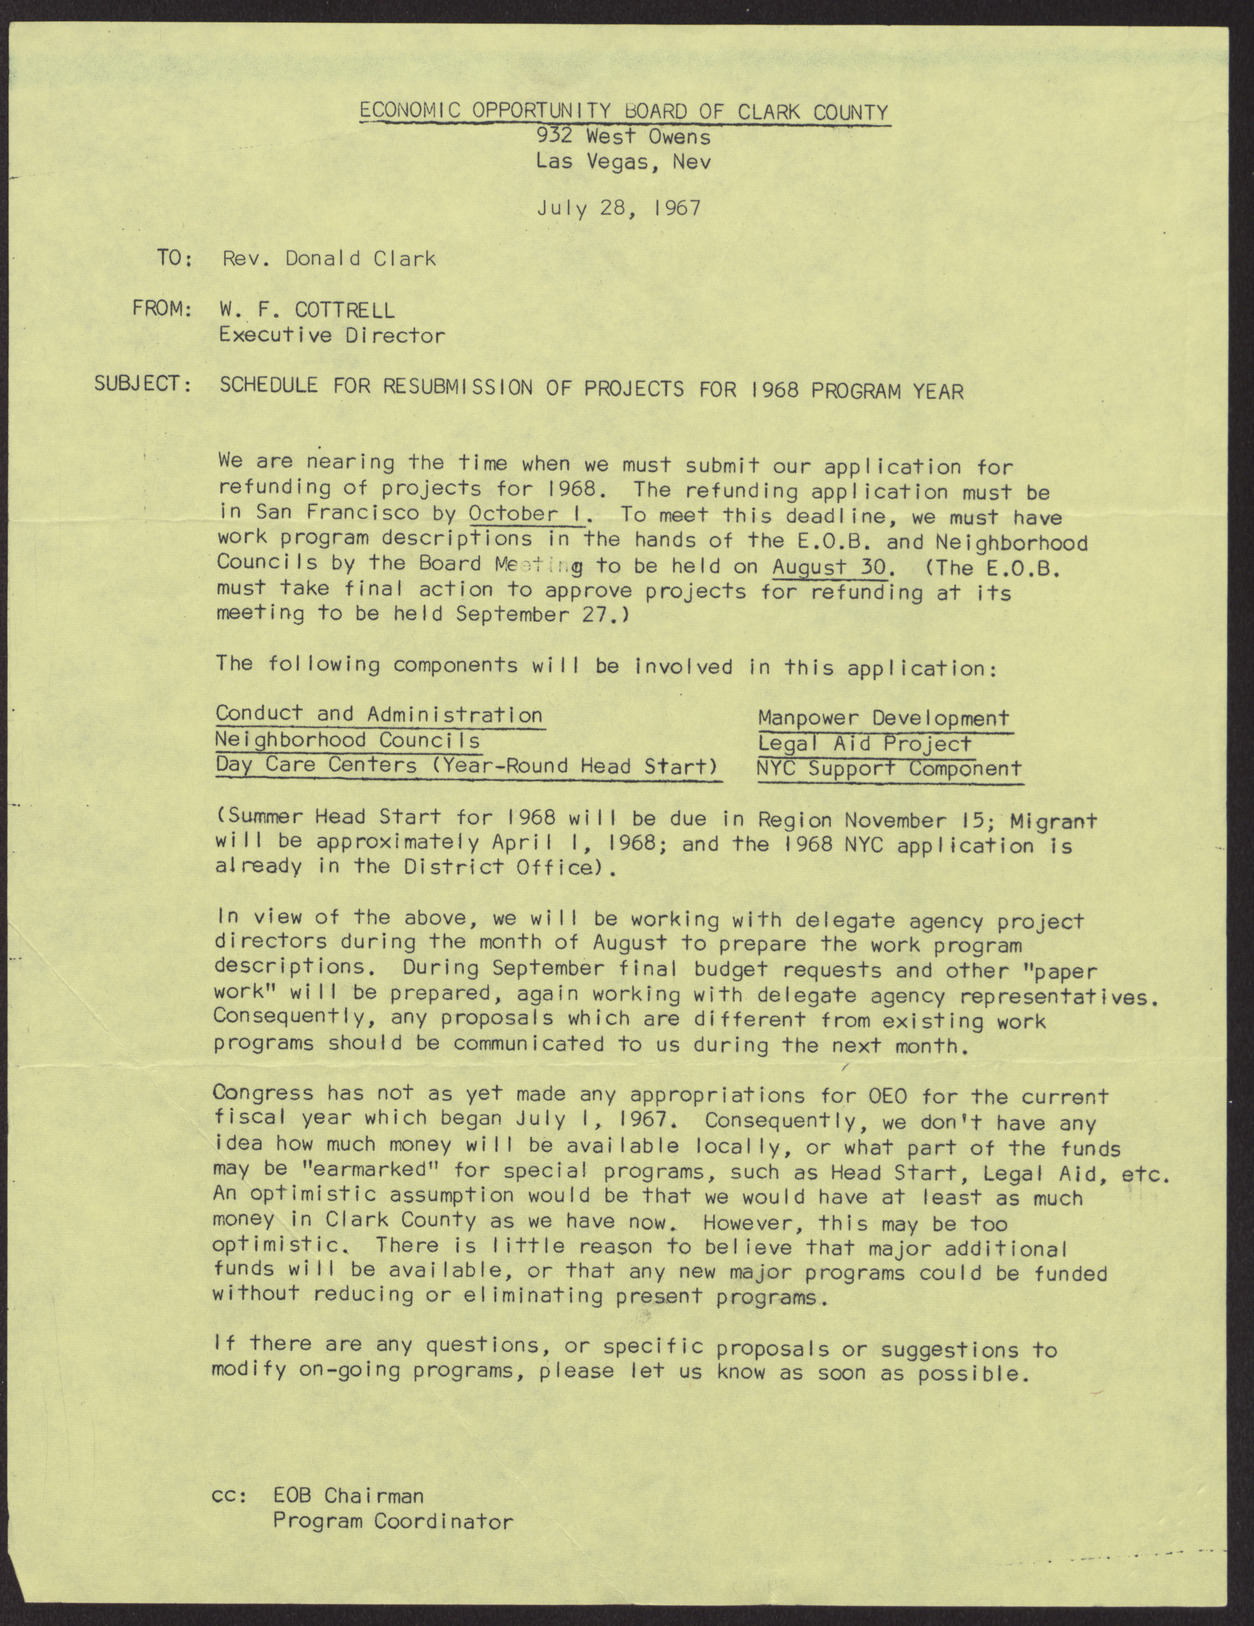 Letter to Rev. Donald Clark from W. F. Cottrell, July 28, 1967